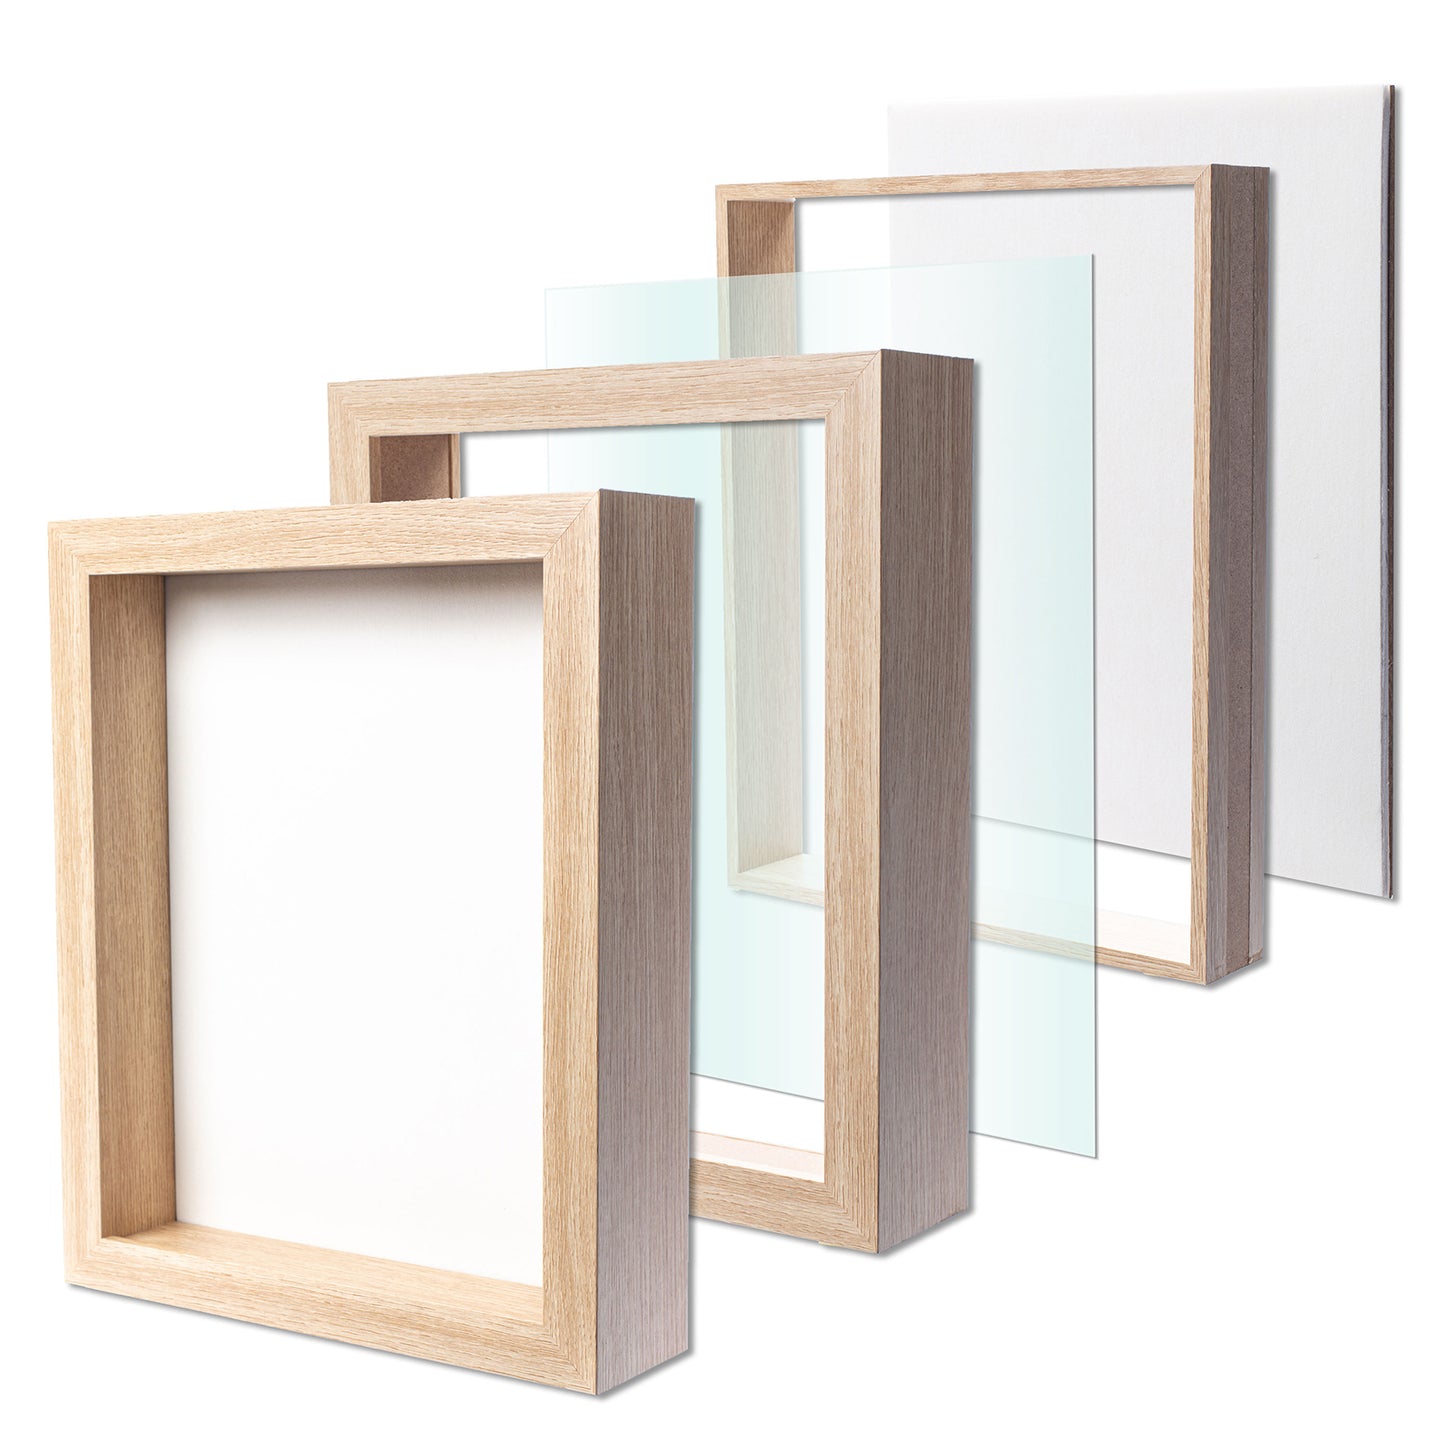 8x8 Picture Frame, Solid Oak Wood 8”x8” Picture Frames Matted to  6”x6”,Square 8 x 8 Wood Frame with Tempered Real Glass, Rustic 8x8 Photo  Frame for